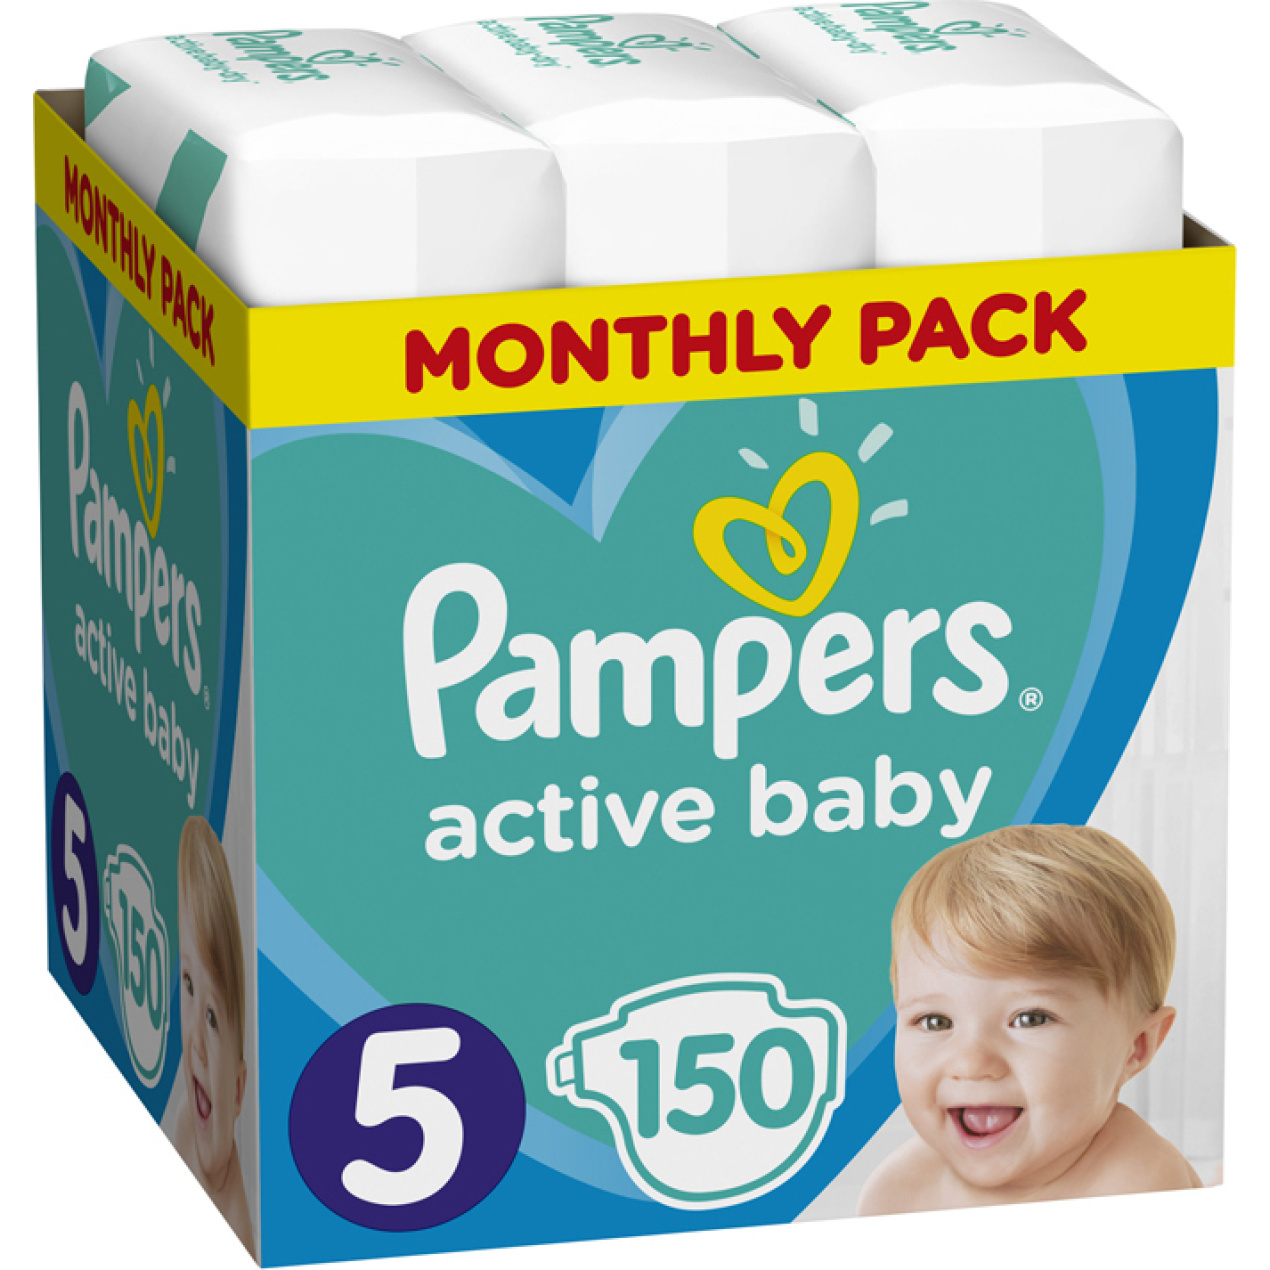 pampers-active-baby-no-5-11-16kg-monthly-pack-150tmx